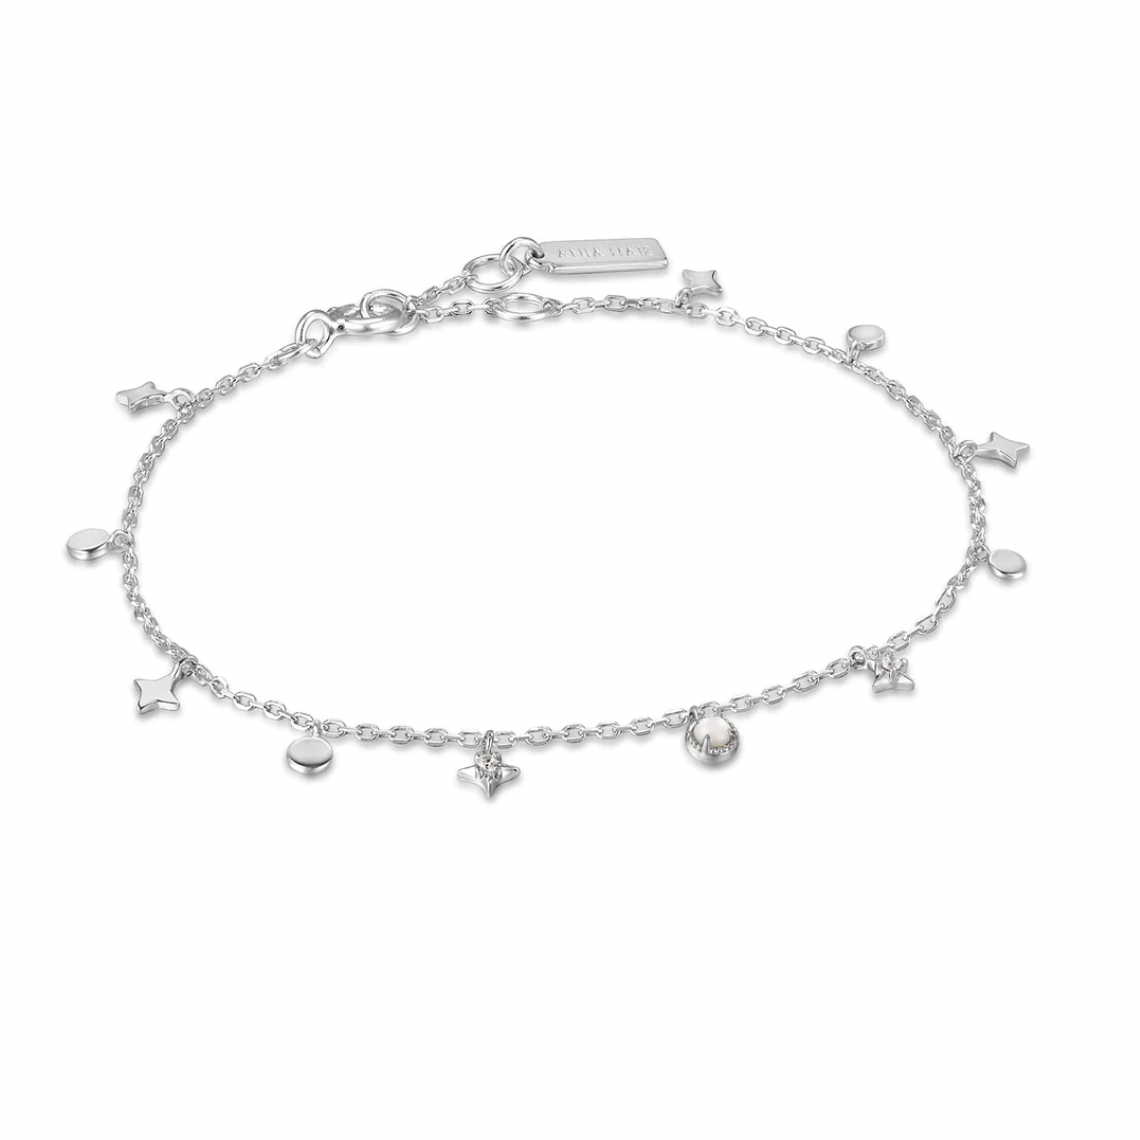 ANIA HAIE STAR MOTHER OF PEARL DROP ANKLET